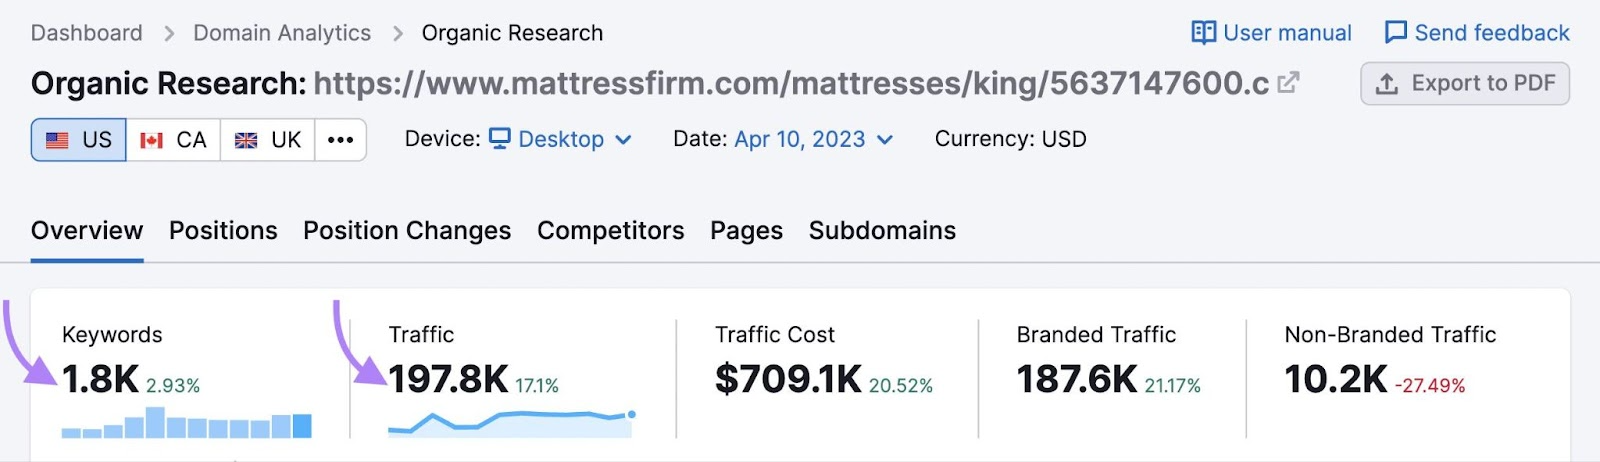 Mattress Firm’s king mattress category page results in Organic Research tool